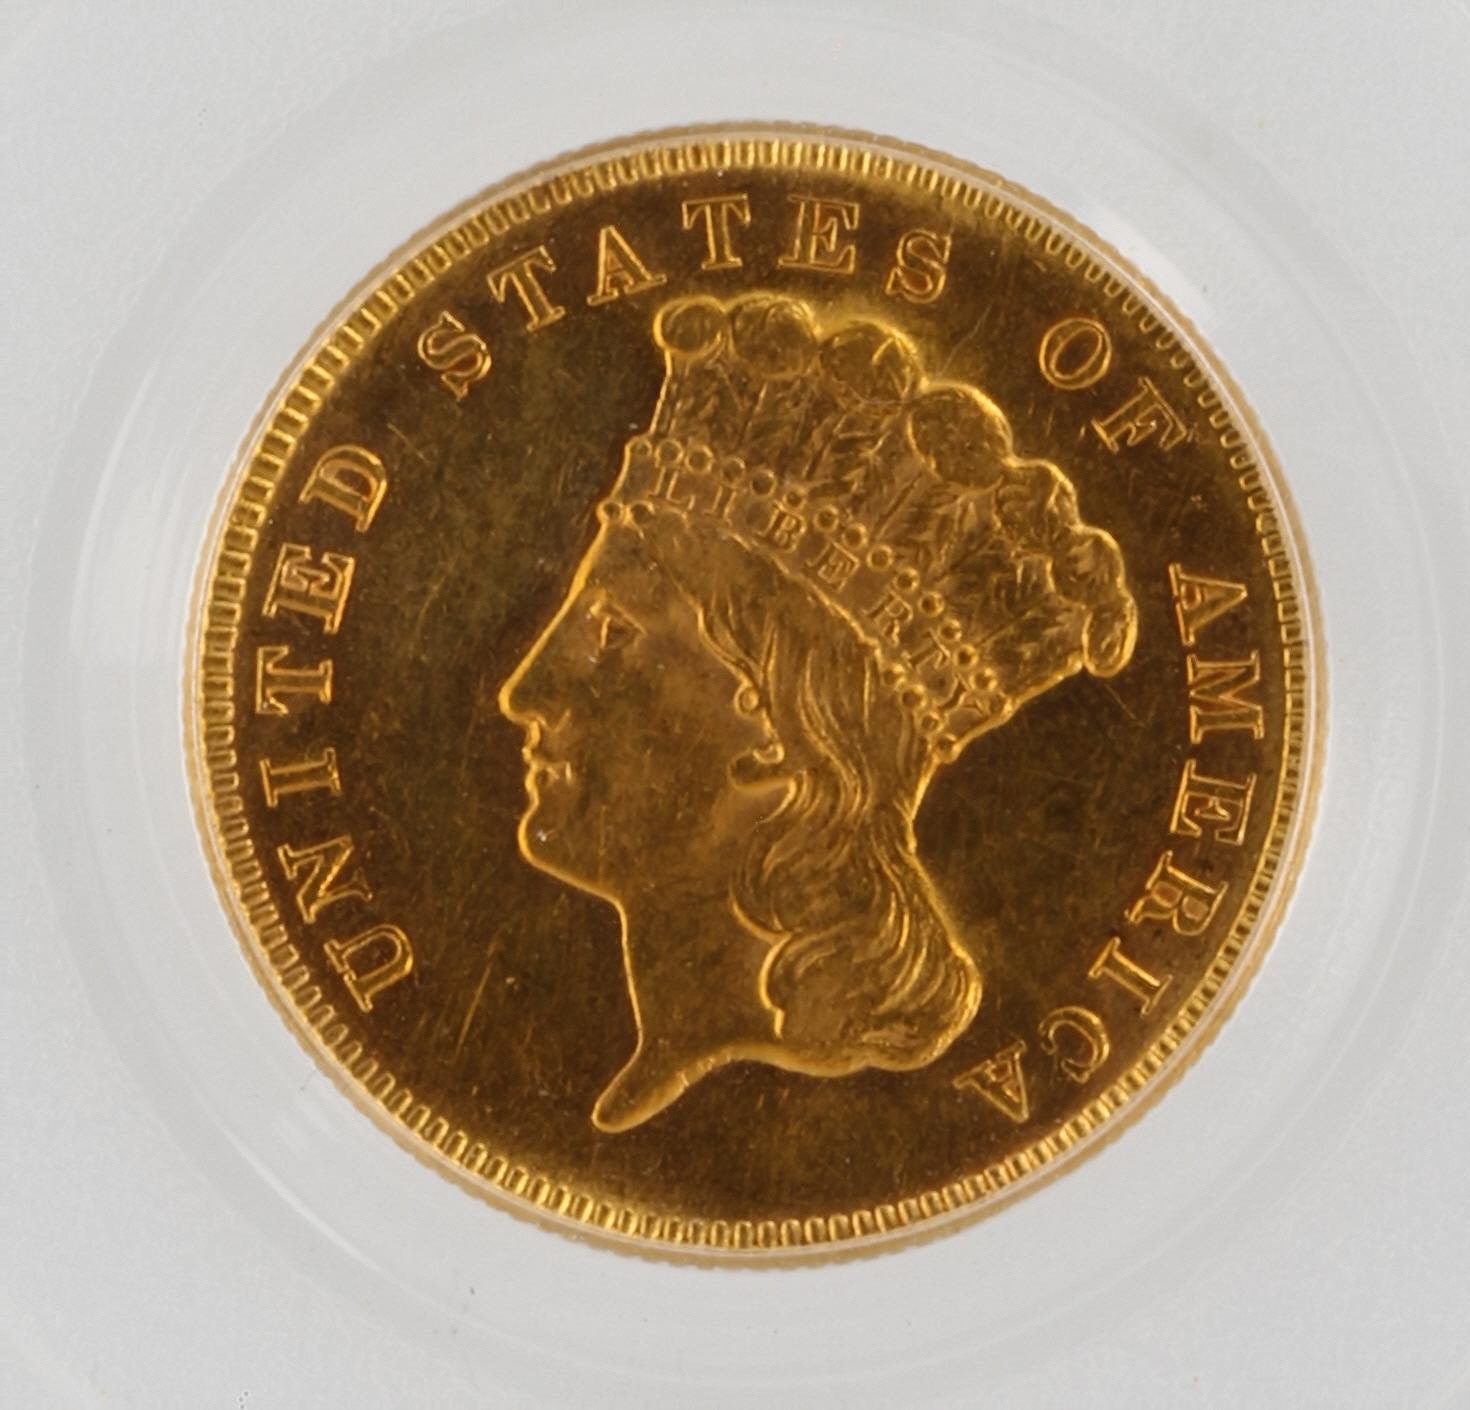 Gold Dollars Archives - Imperial Coin Exchange